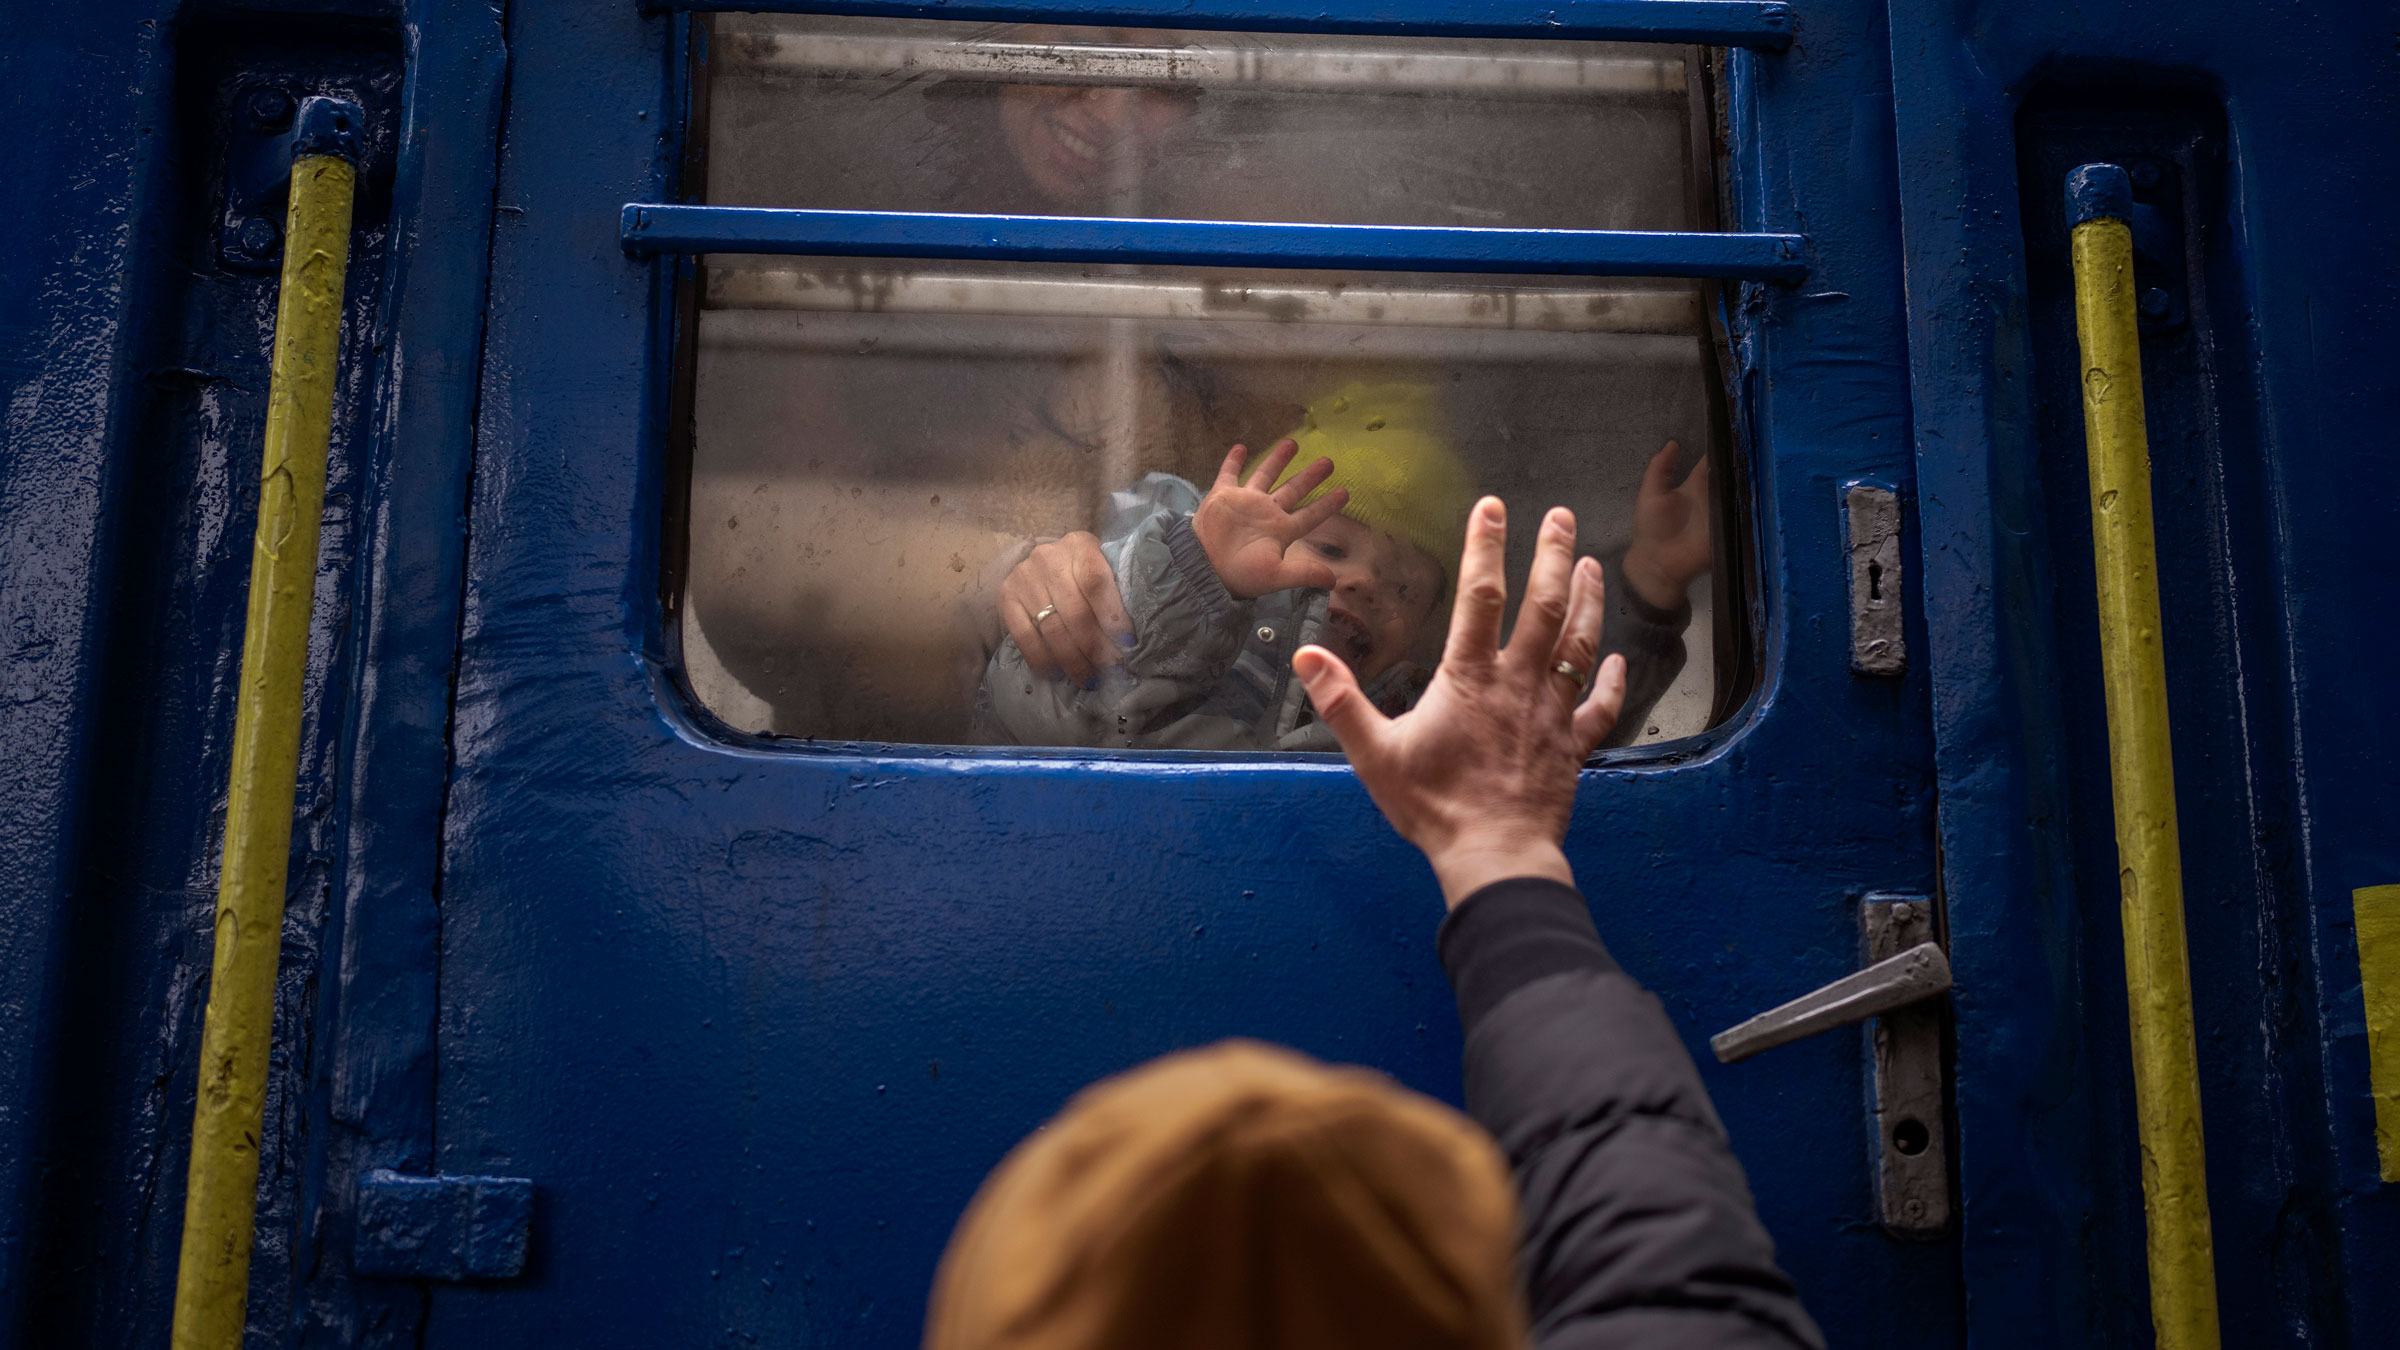 A man says goodbye to his wife and son at a train station in Kyiv, Ukraine, on Thursday. He was staying behind to fight while his family was leaving to seek refuge in a neighboring country. 